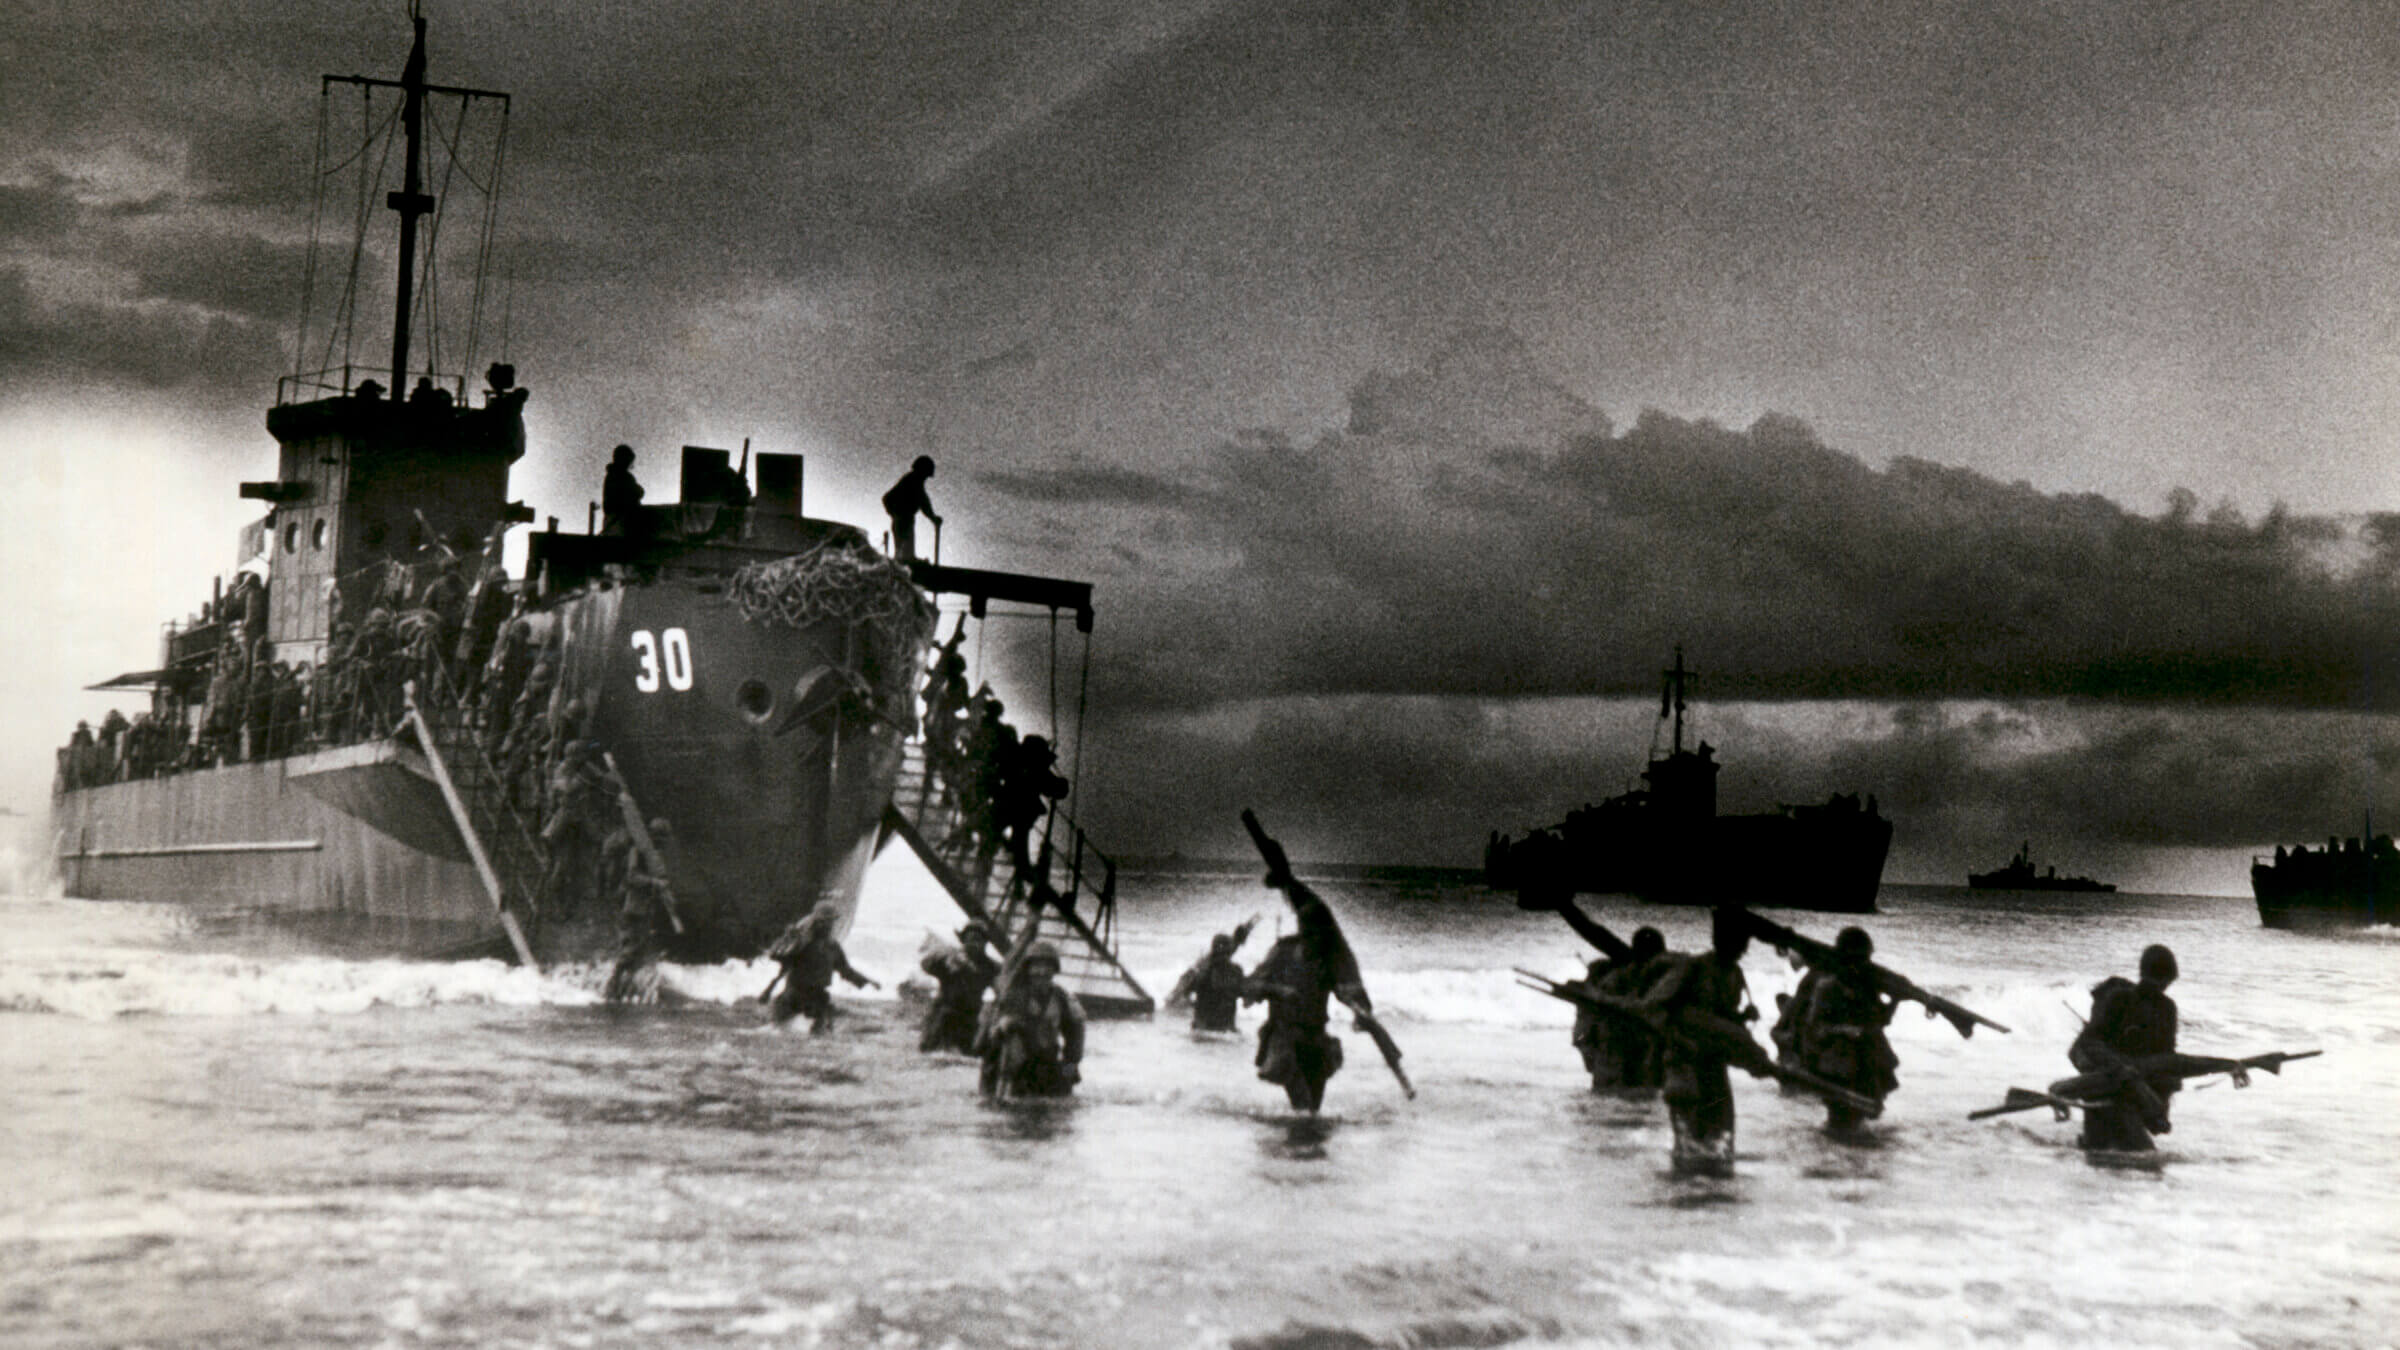 View of Allied troops from a transport vessel, among them medics with stretchers over their shoulders, as they wade ashore during the invasion of Normandy, France, in June 1944.